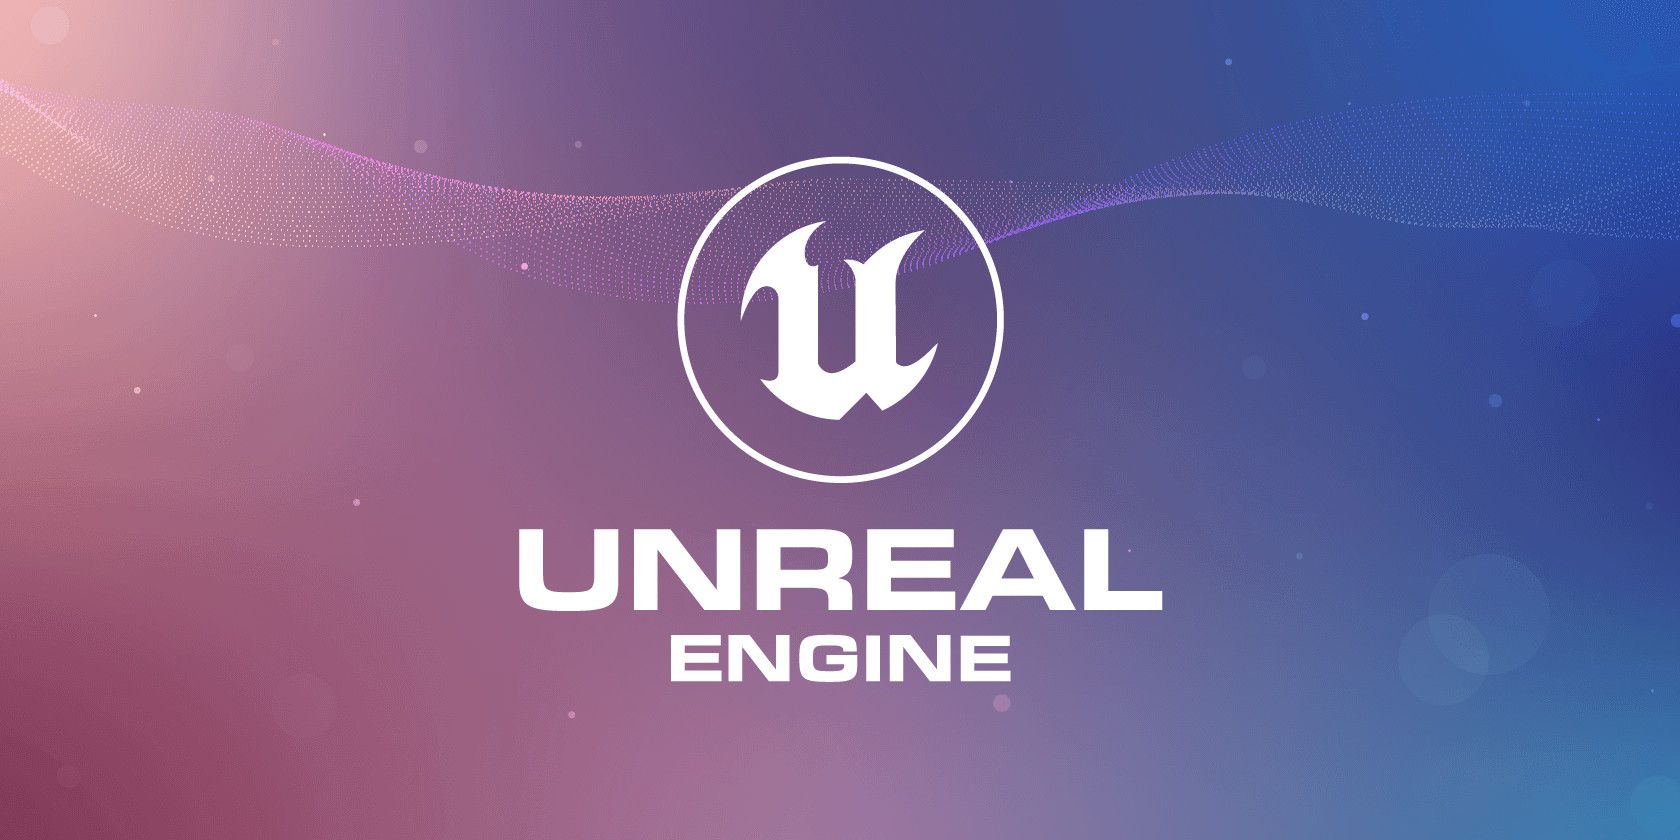 Unreal Engine While Logo on Red Blue Gradient Background